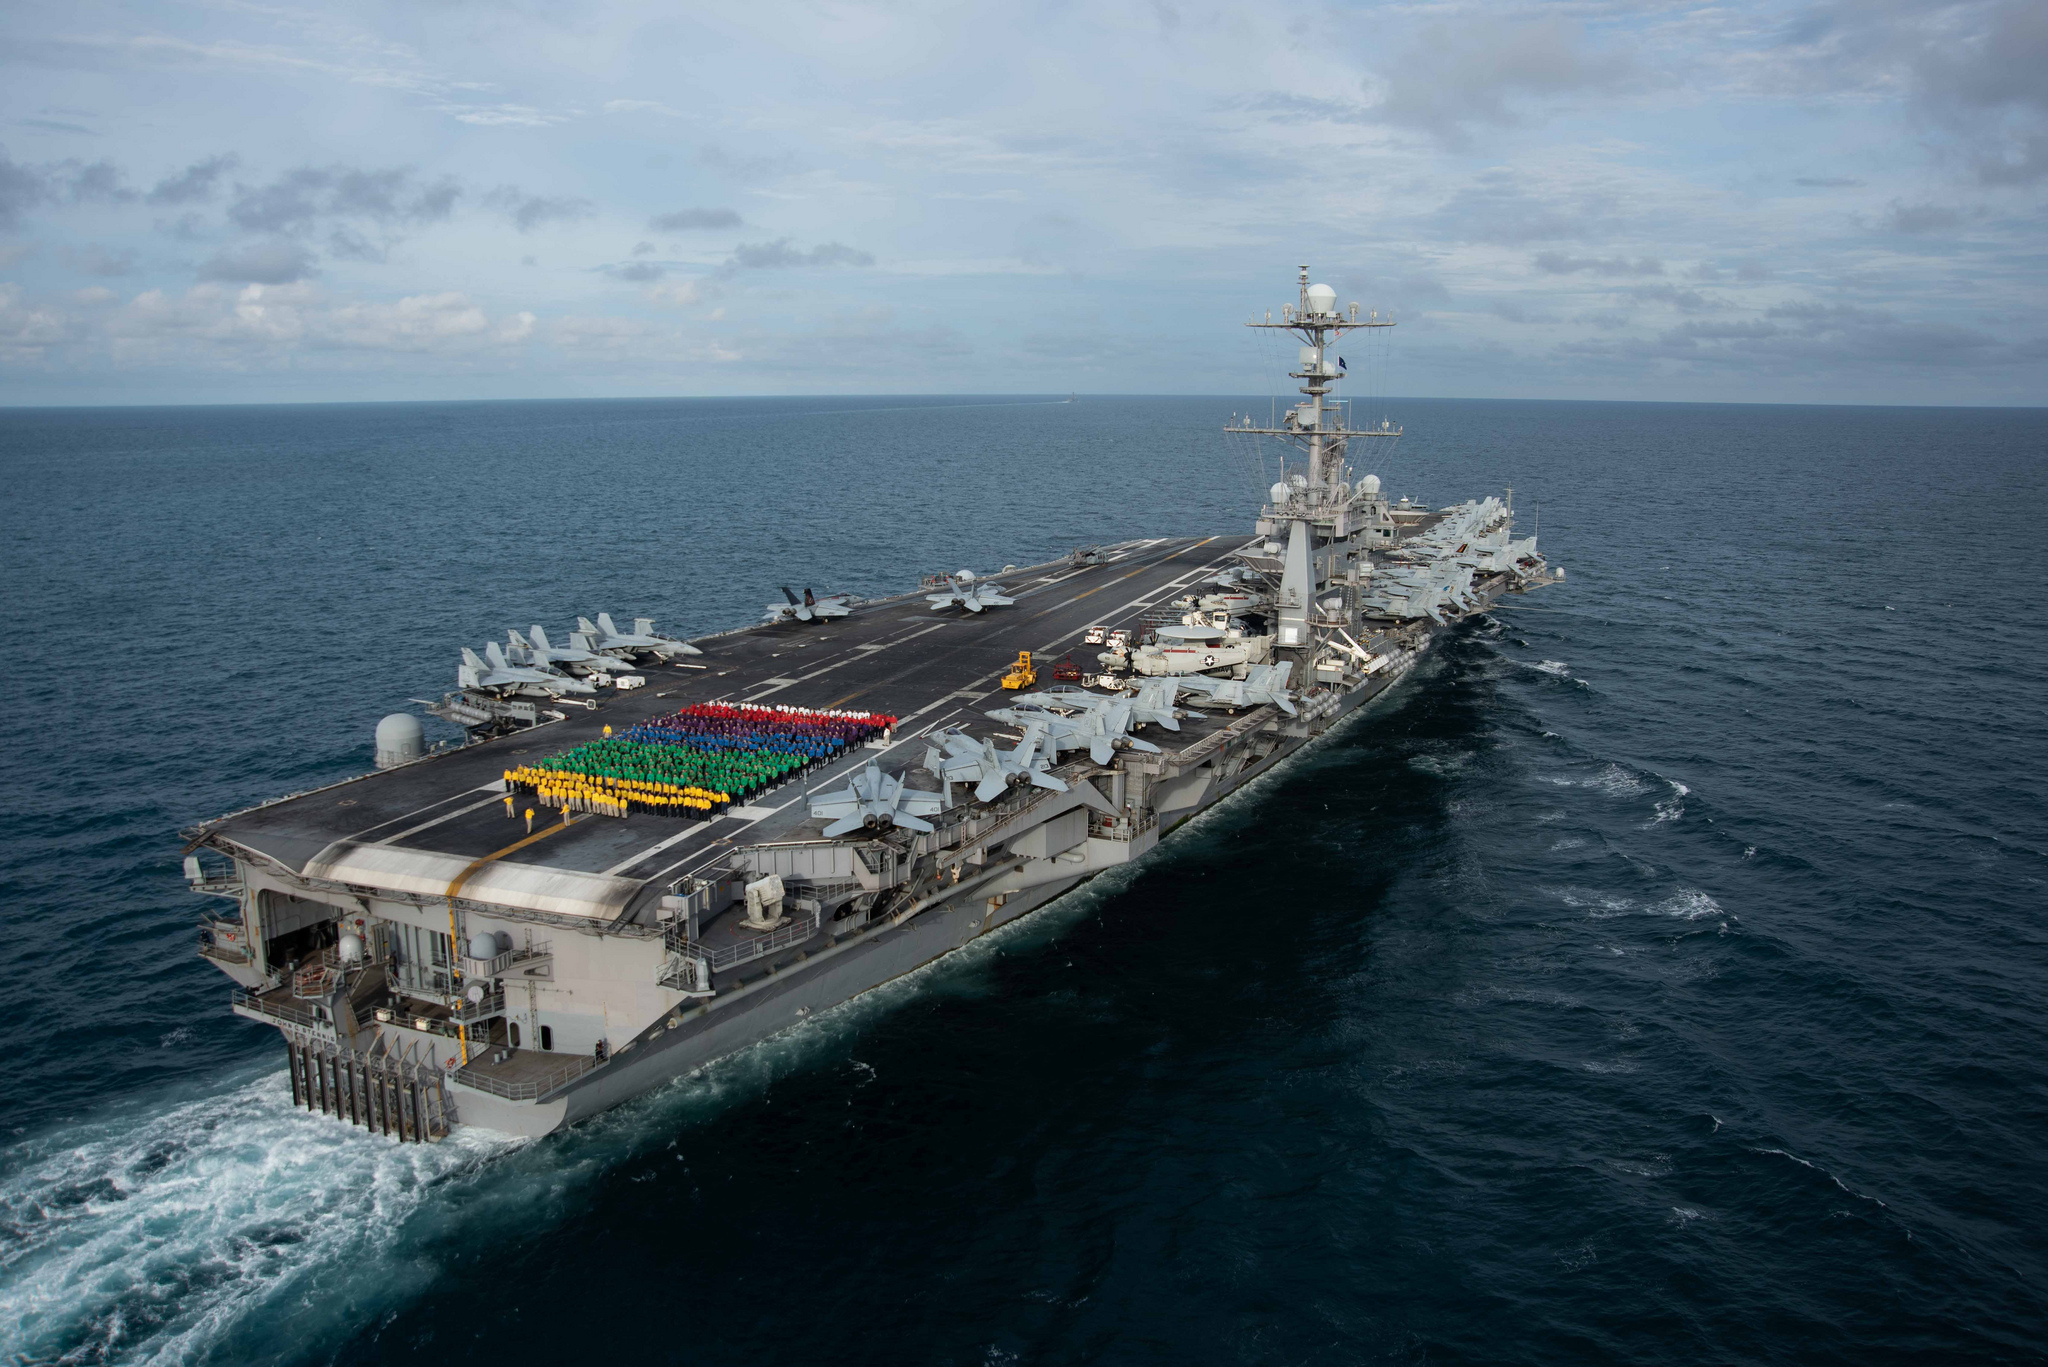 General 2048x1367 United States Navy military aircraft carrier vehicle warship USS John C. Stennis (CVN-74) ship flight deck Crew standing sailors aerial view rear view 2019 (year) Indian Ocean